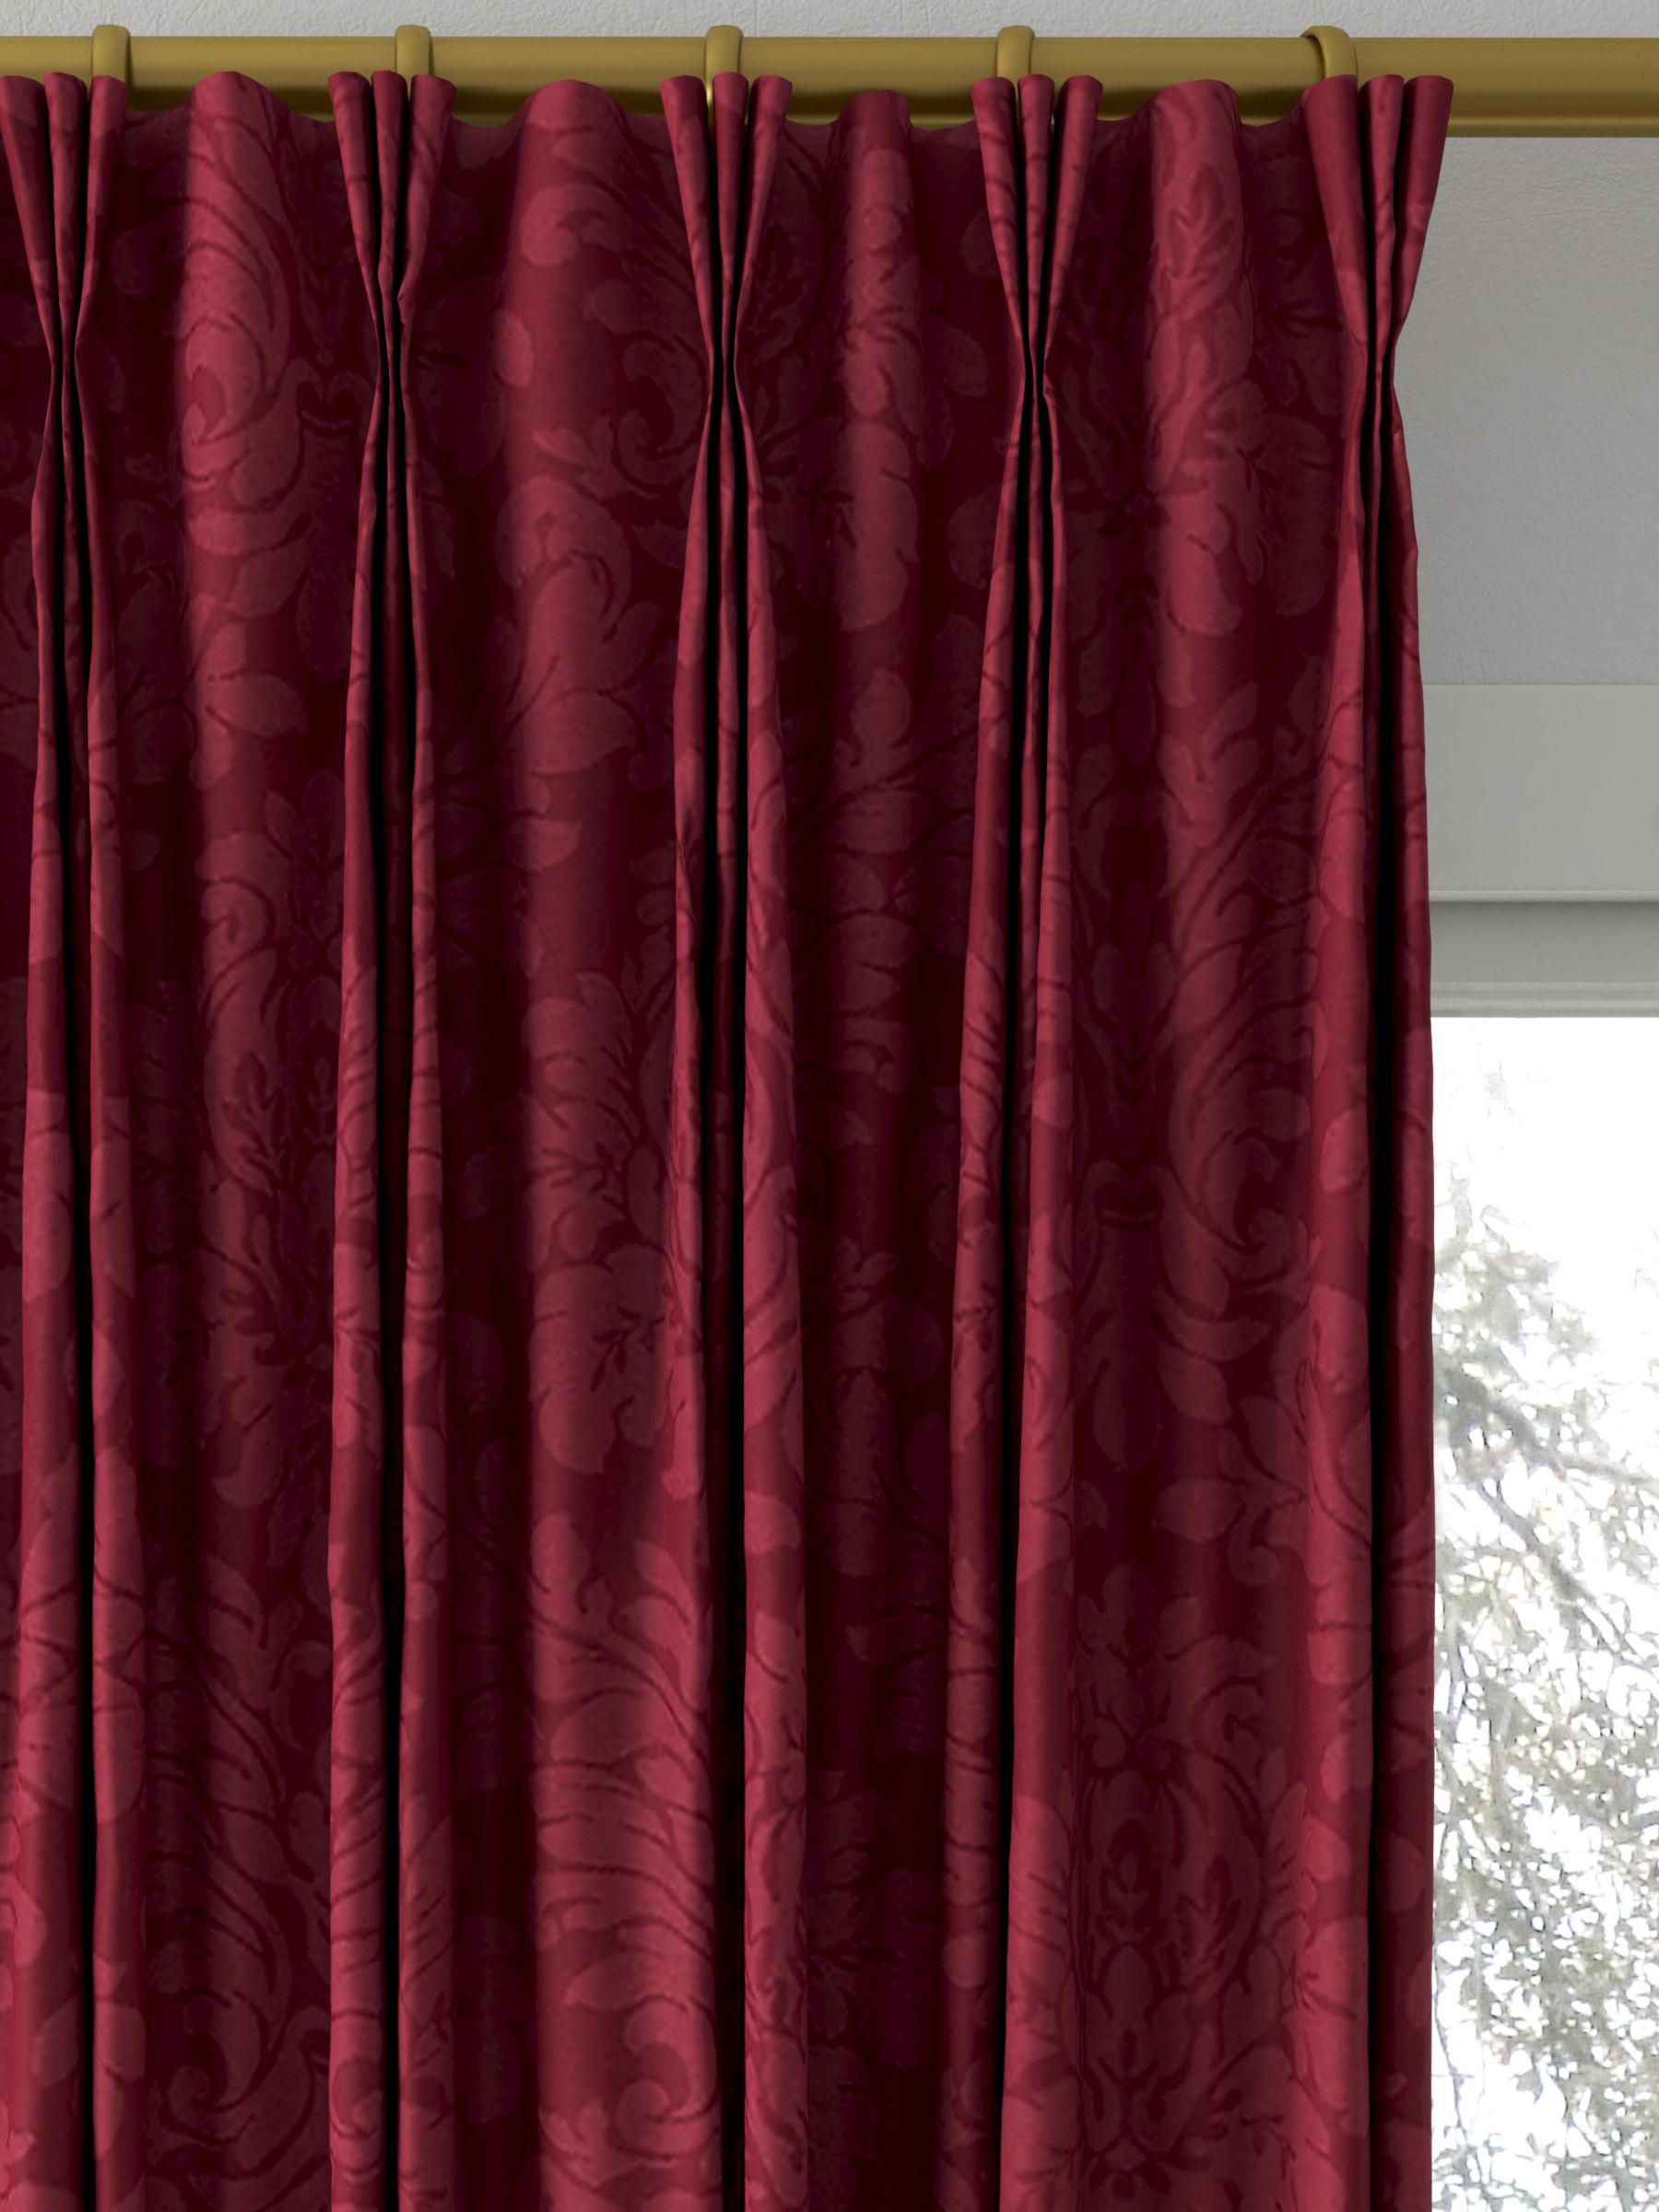 Sanderson Lymington Damask Made to Measure Curtains, Redcurrant